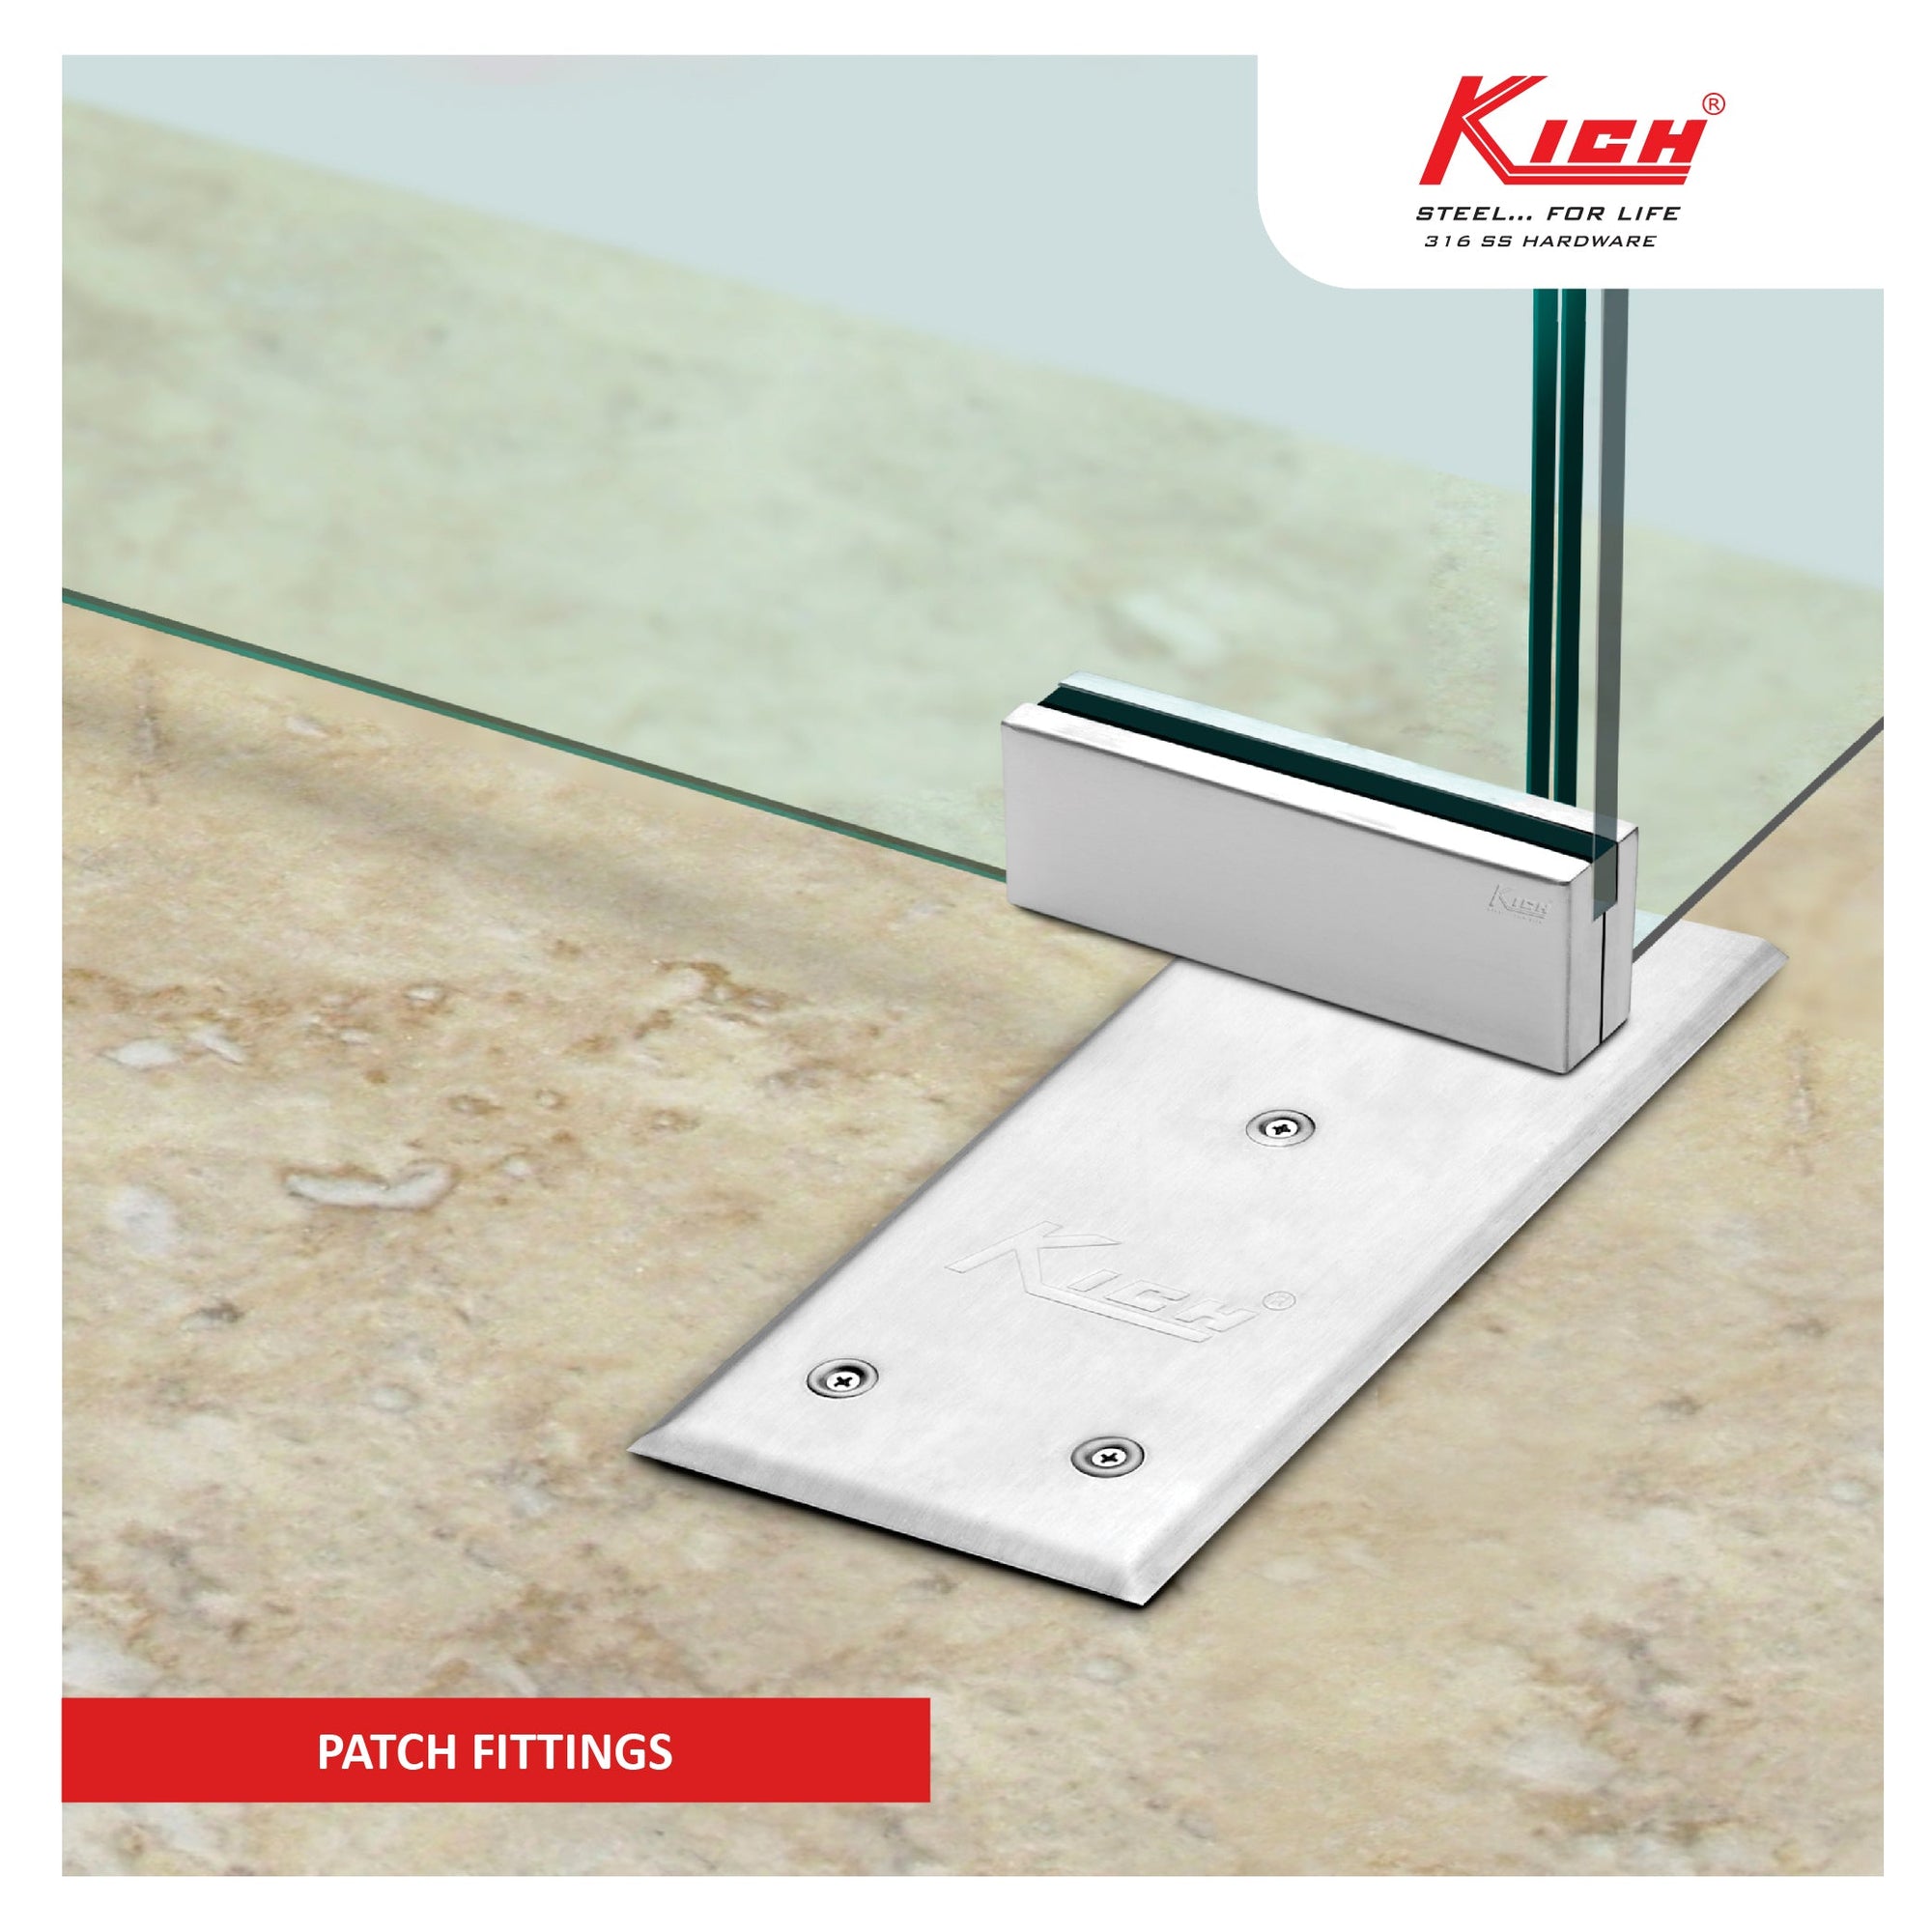 Kich Patch Fittings - Enhance Your Interior with Durable and Stylish Fittings - Shop Now at M. M. Noorbhoy & Co